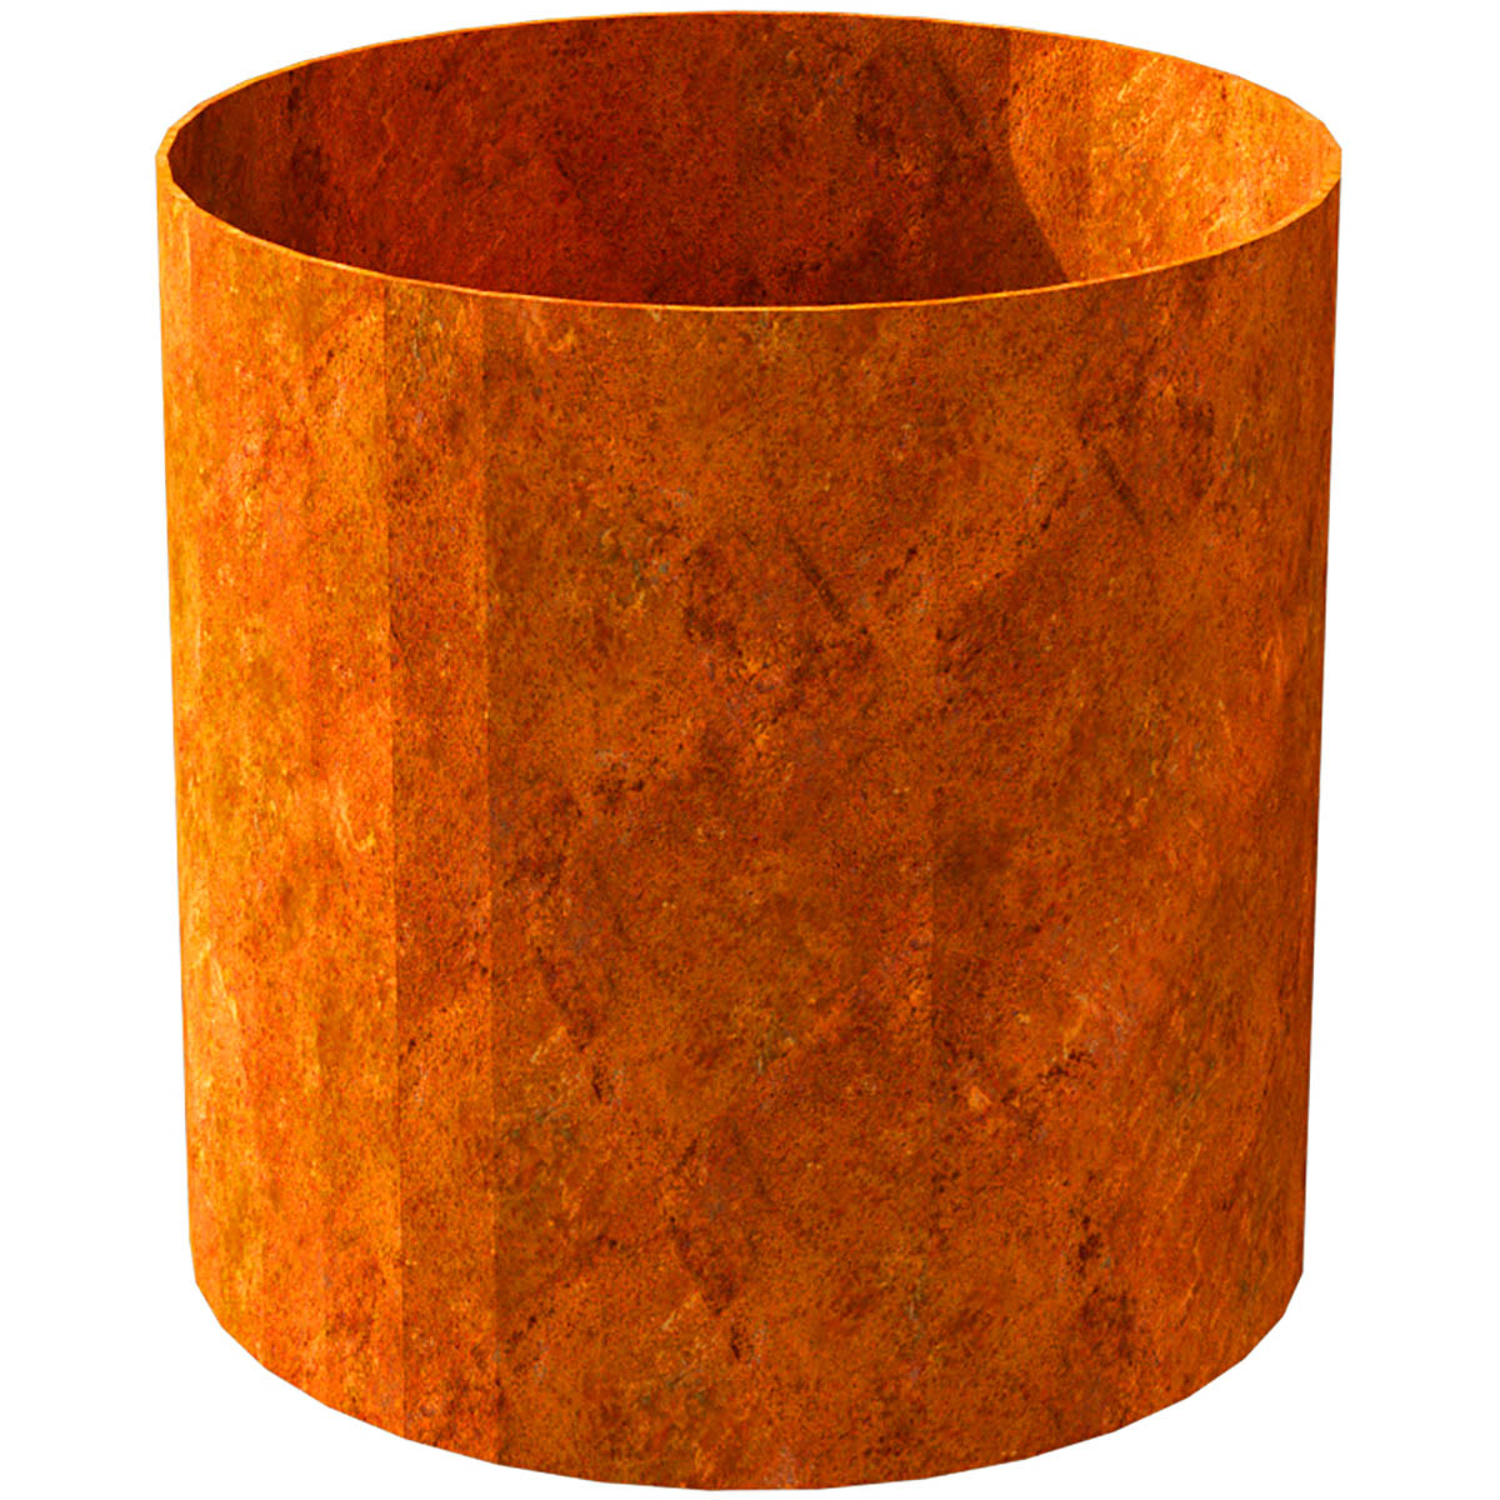 FOREST STYLE - Bac rond 11x11cm CORTEN